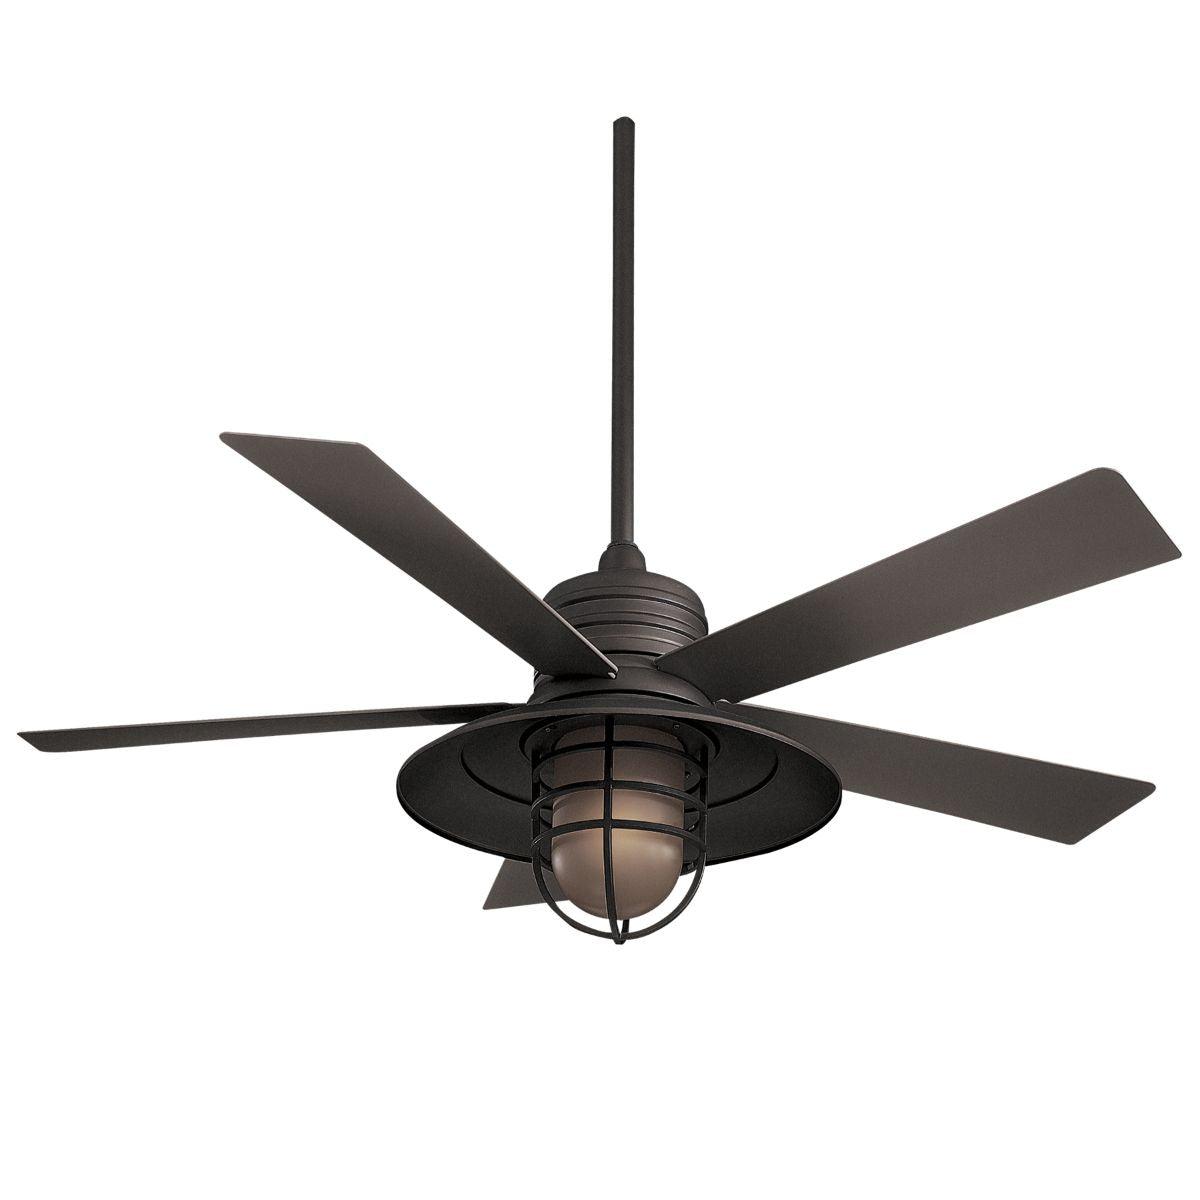 Rainman 54 Inch Contemporary Outdoor Ceiling Fan With Light, Wall Control Included - Bees Lighting